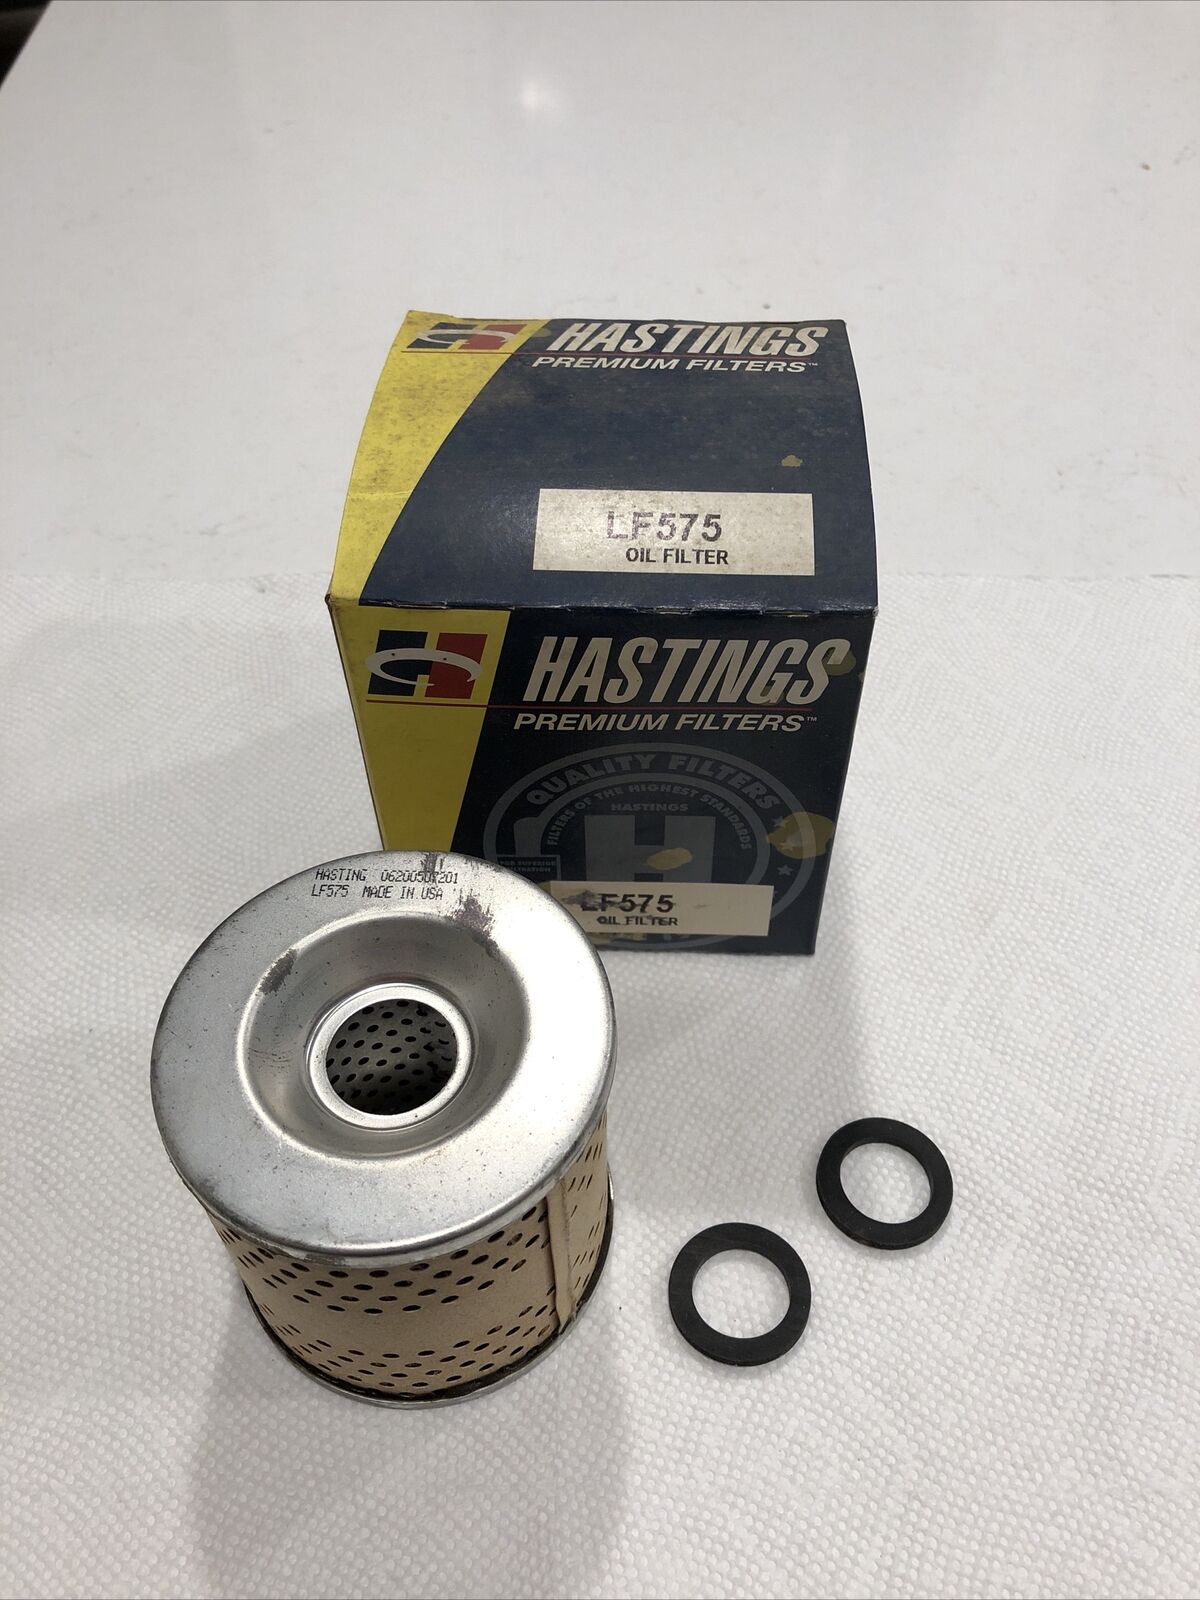 New Hastings LF575 Oil Filter Replaces Wix 24942